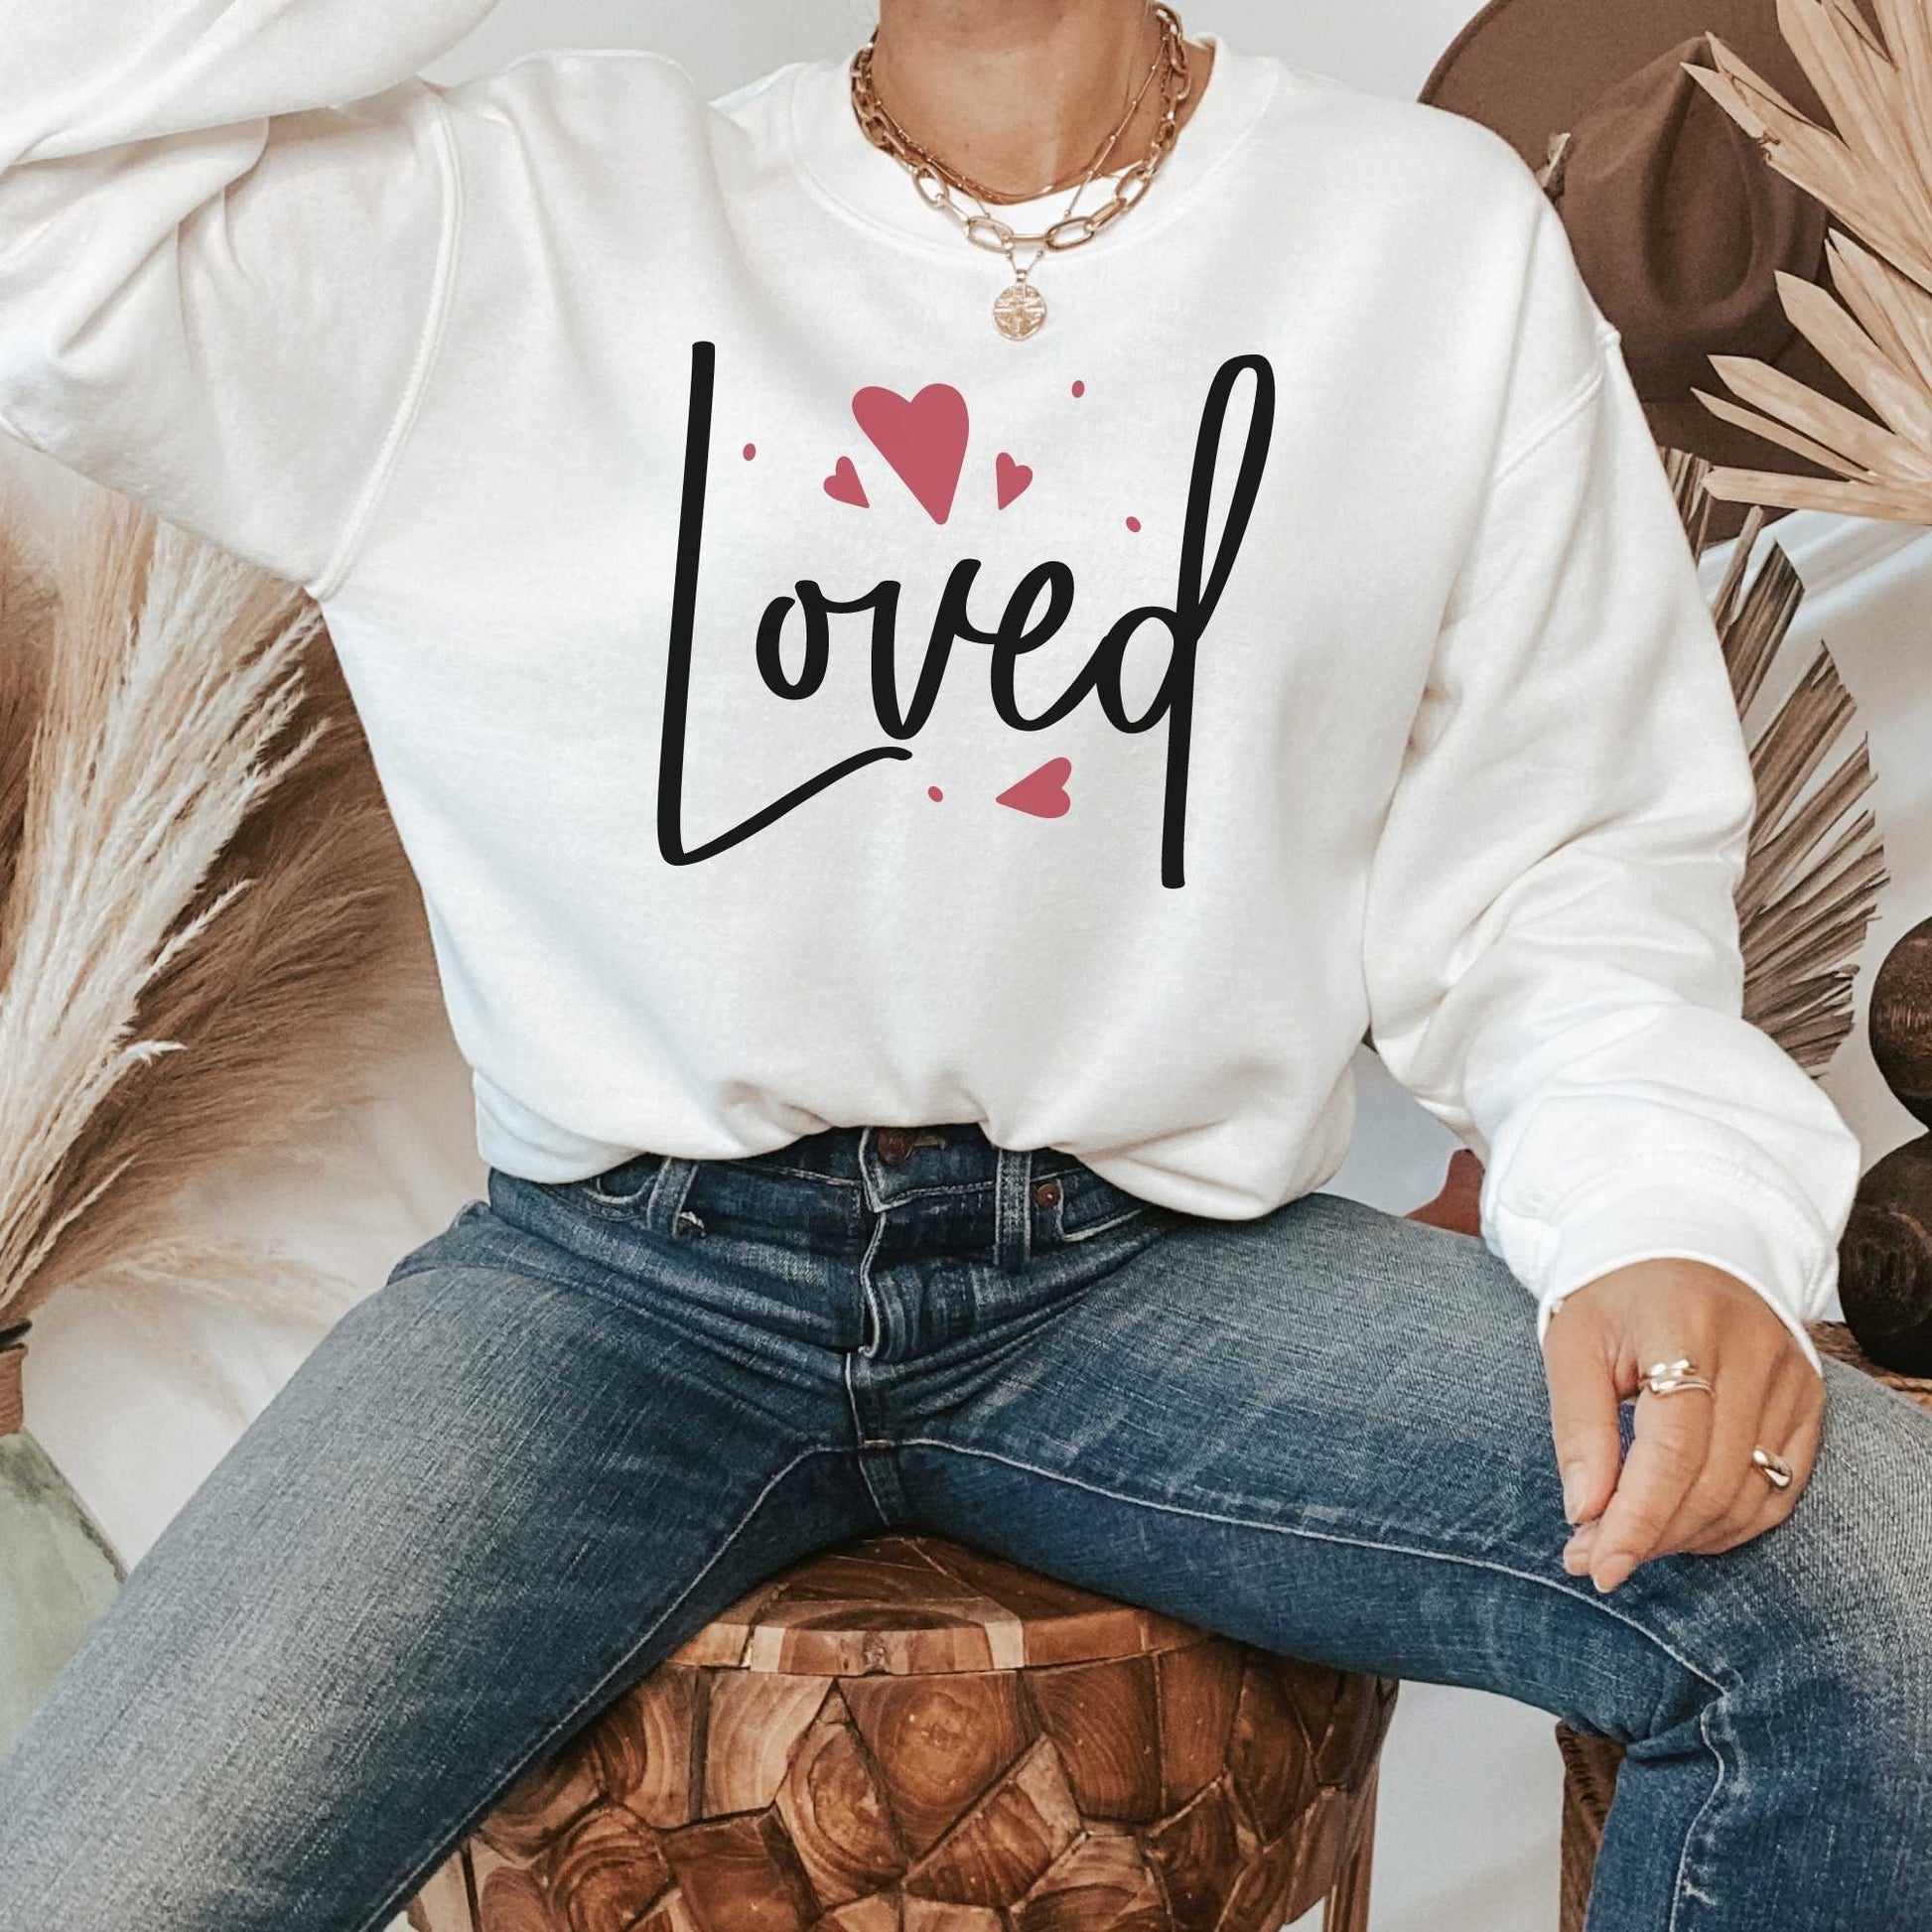 Loved, Cute Christian Shirts about Love for Women or Men